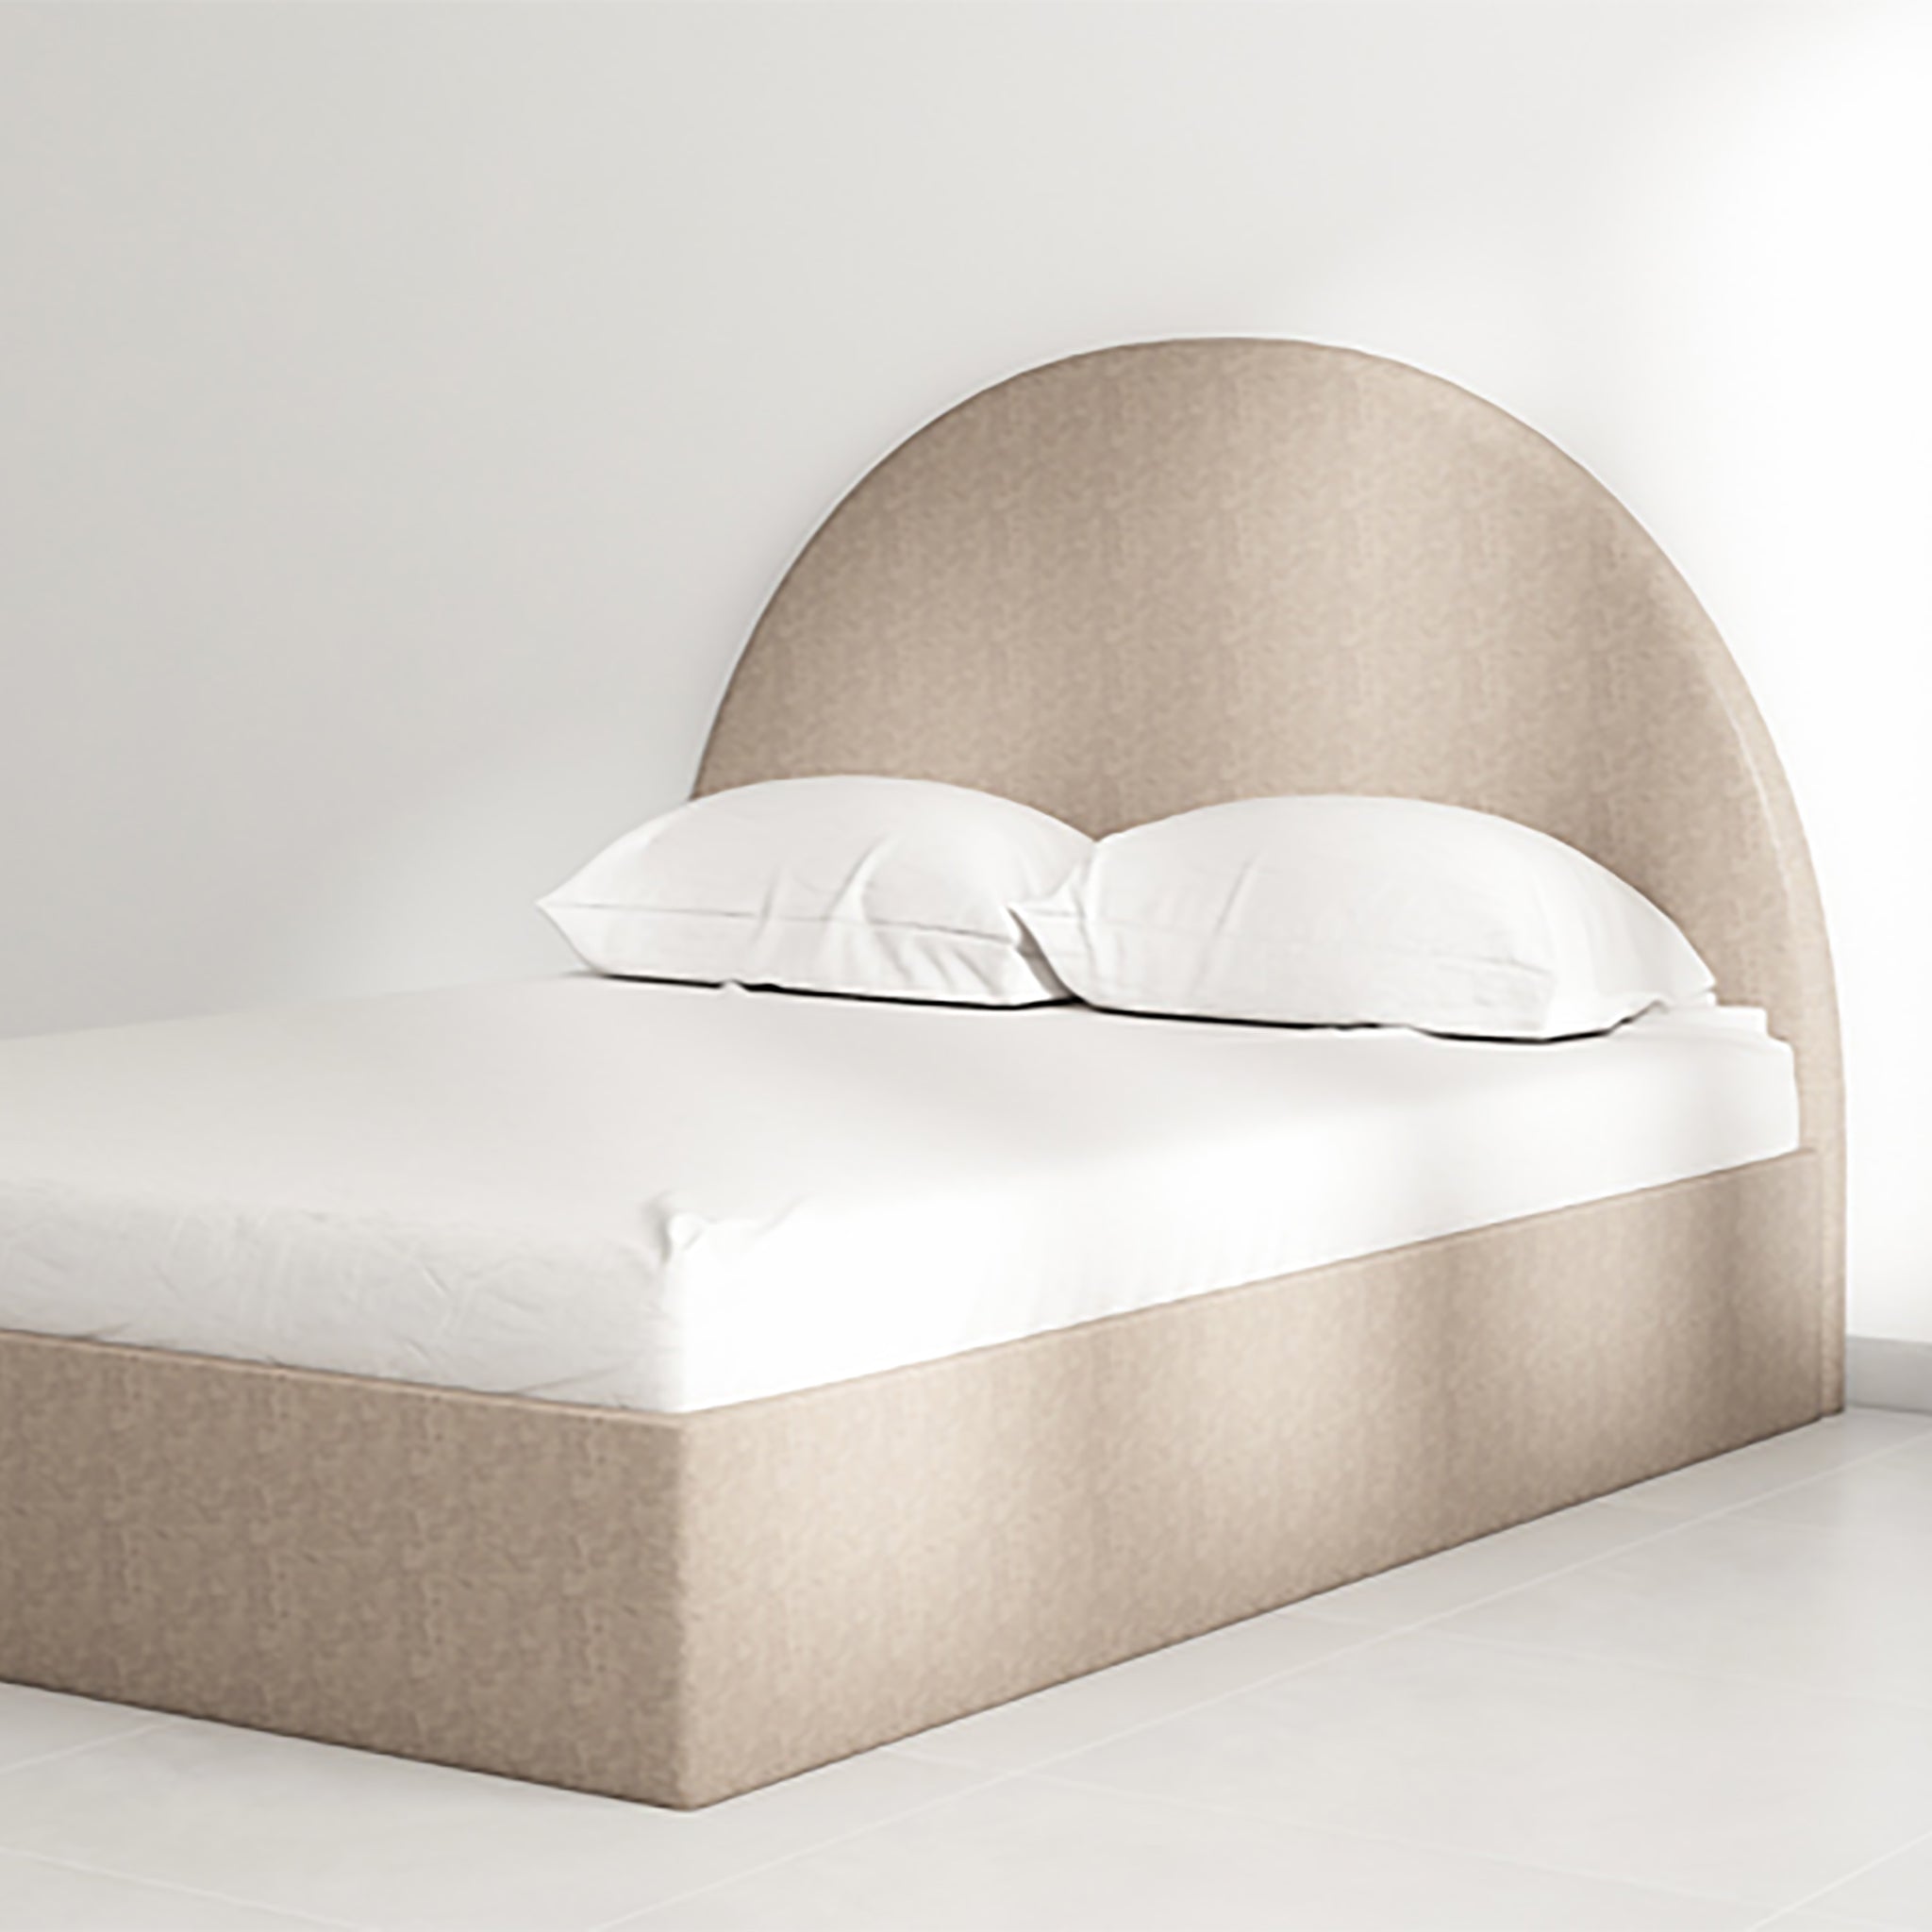 Space-saving Archie Bed in light grey upholstery, perfect for tight spaces.